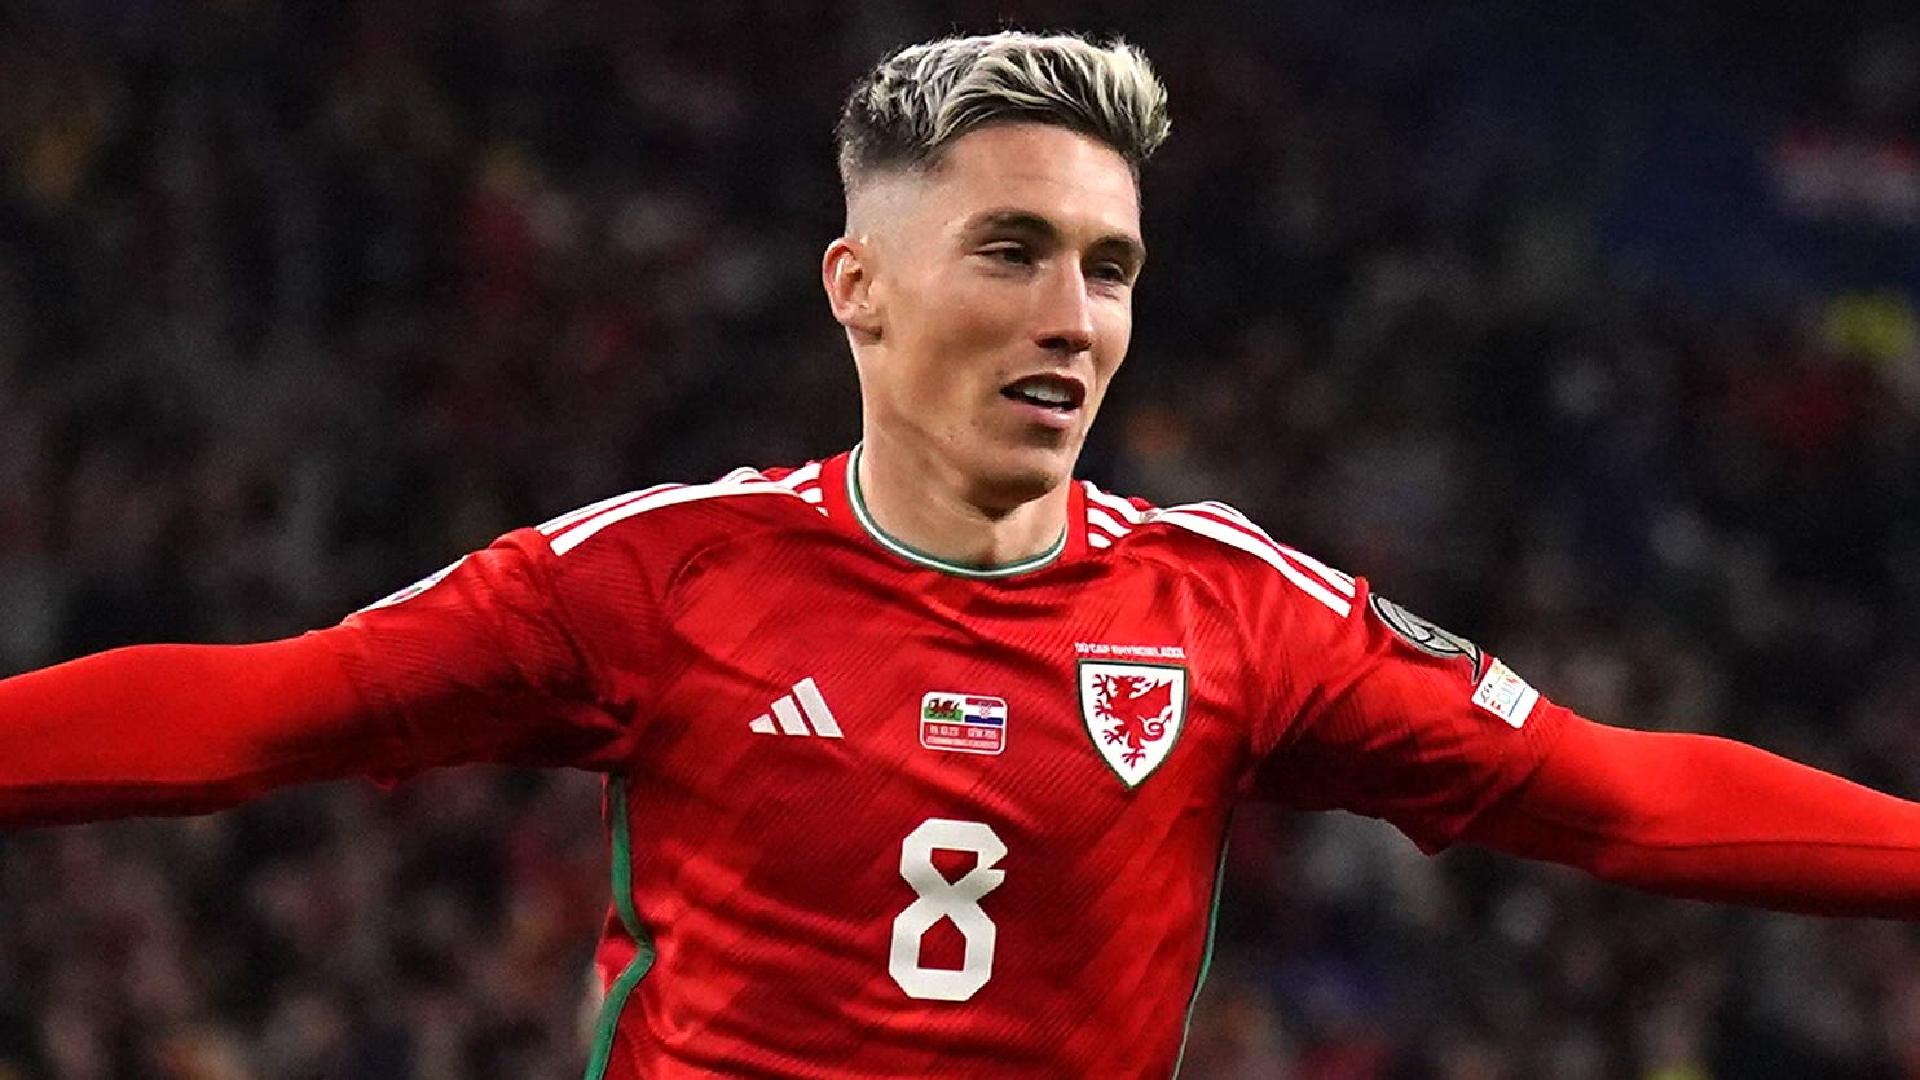 Harry Wilson double gives Wales win over Croatia to boost qualification hopes